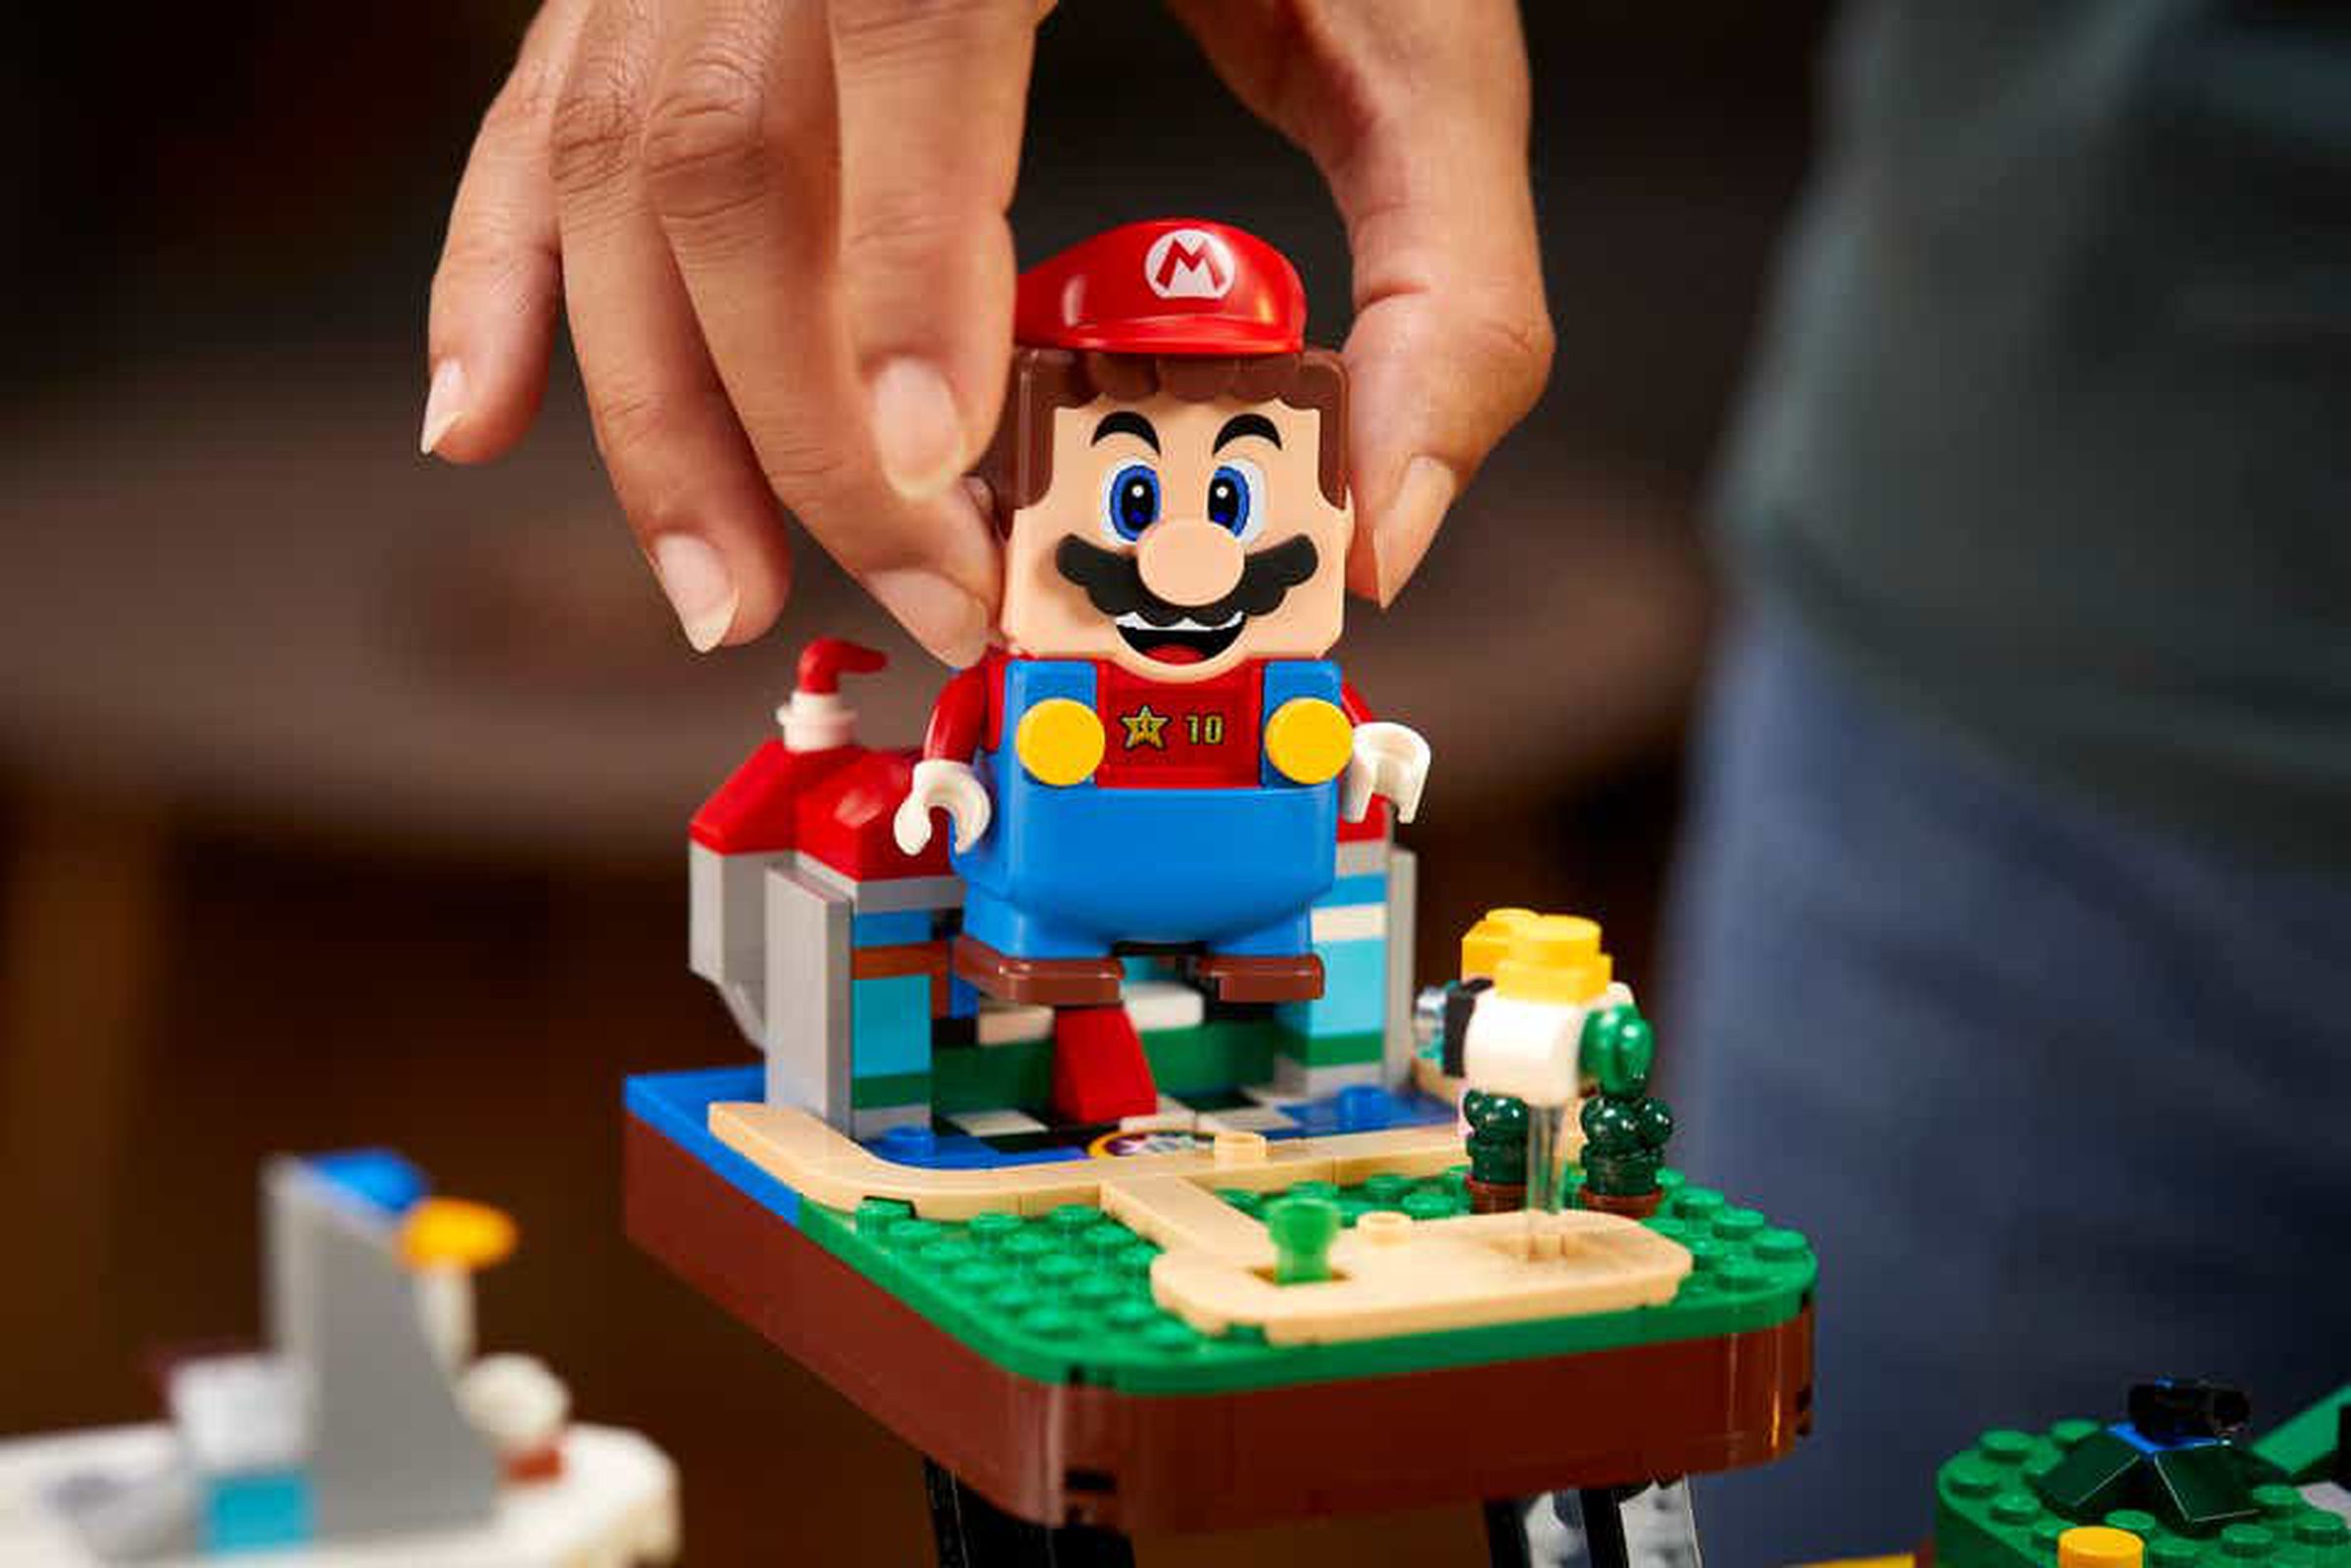 Lego’s previous Mario figures work with the new set.